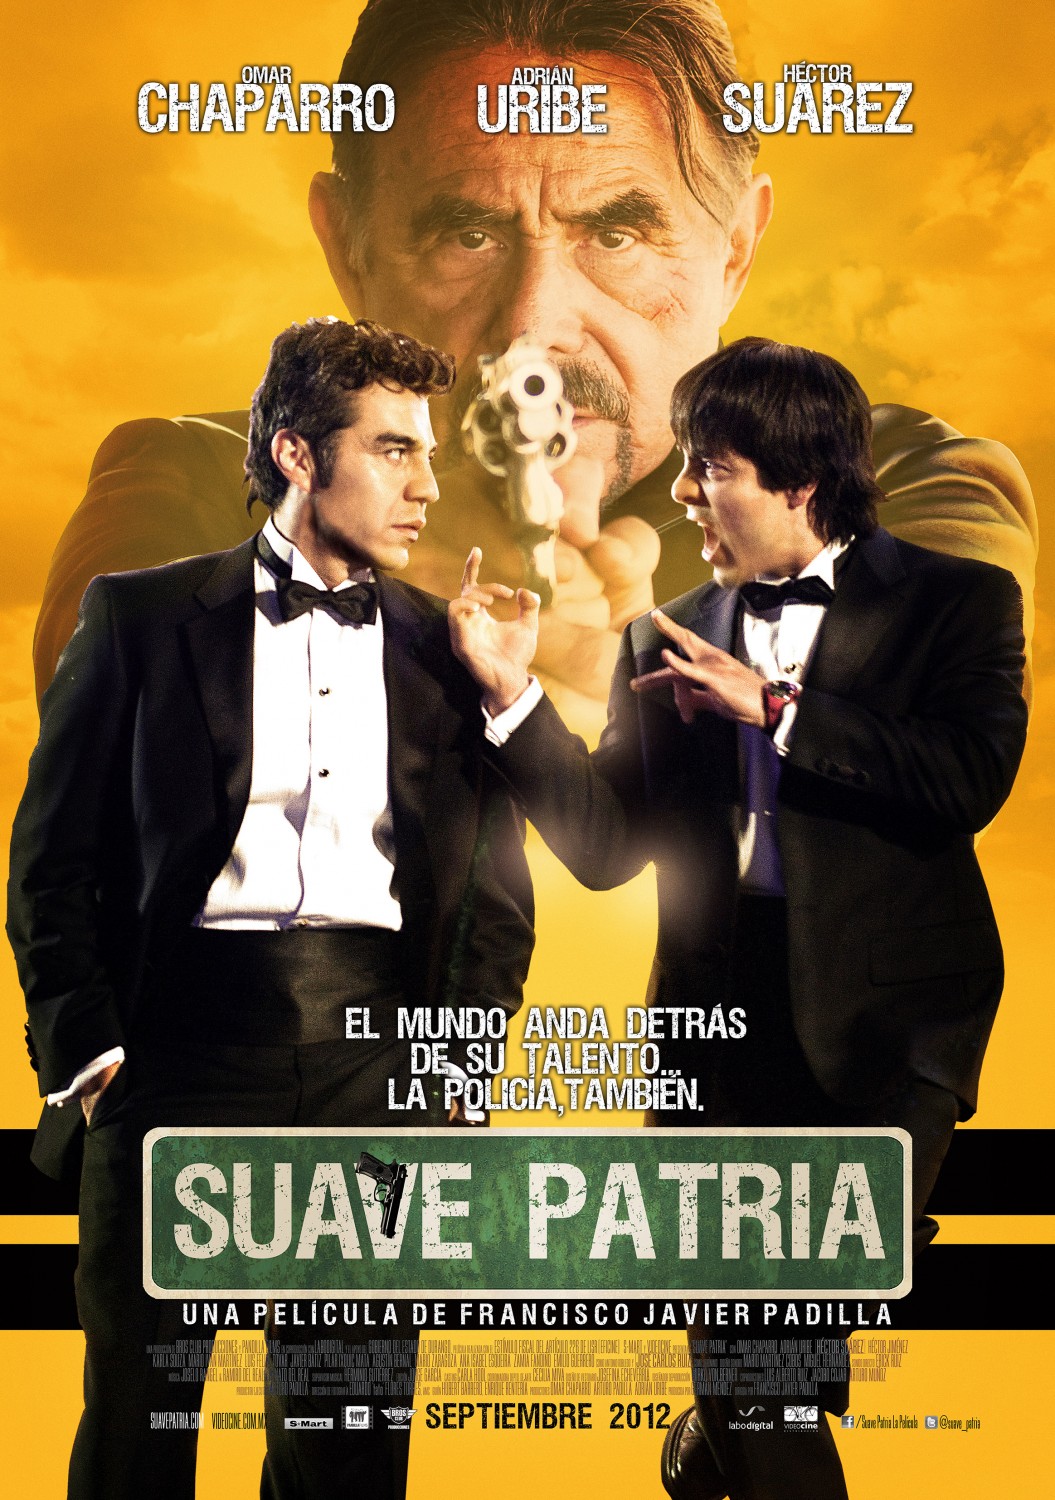 Extra Large Movie Poster Image for Suave patria 